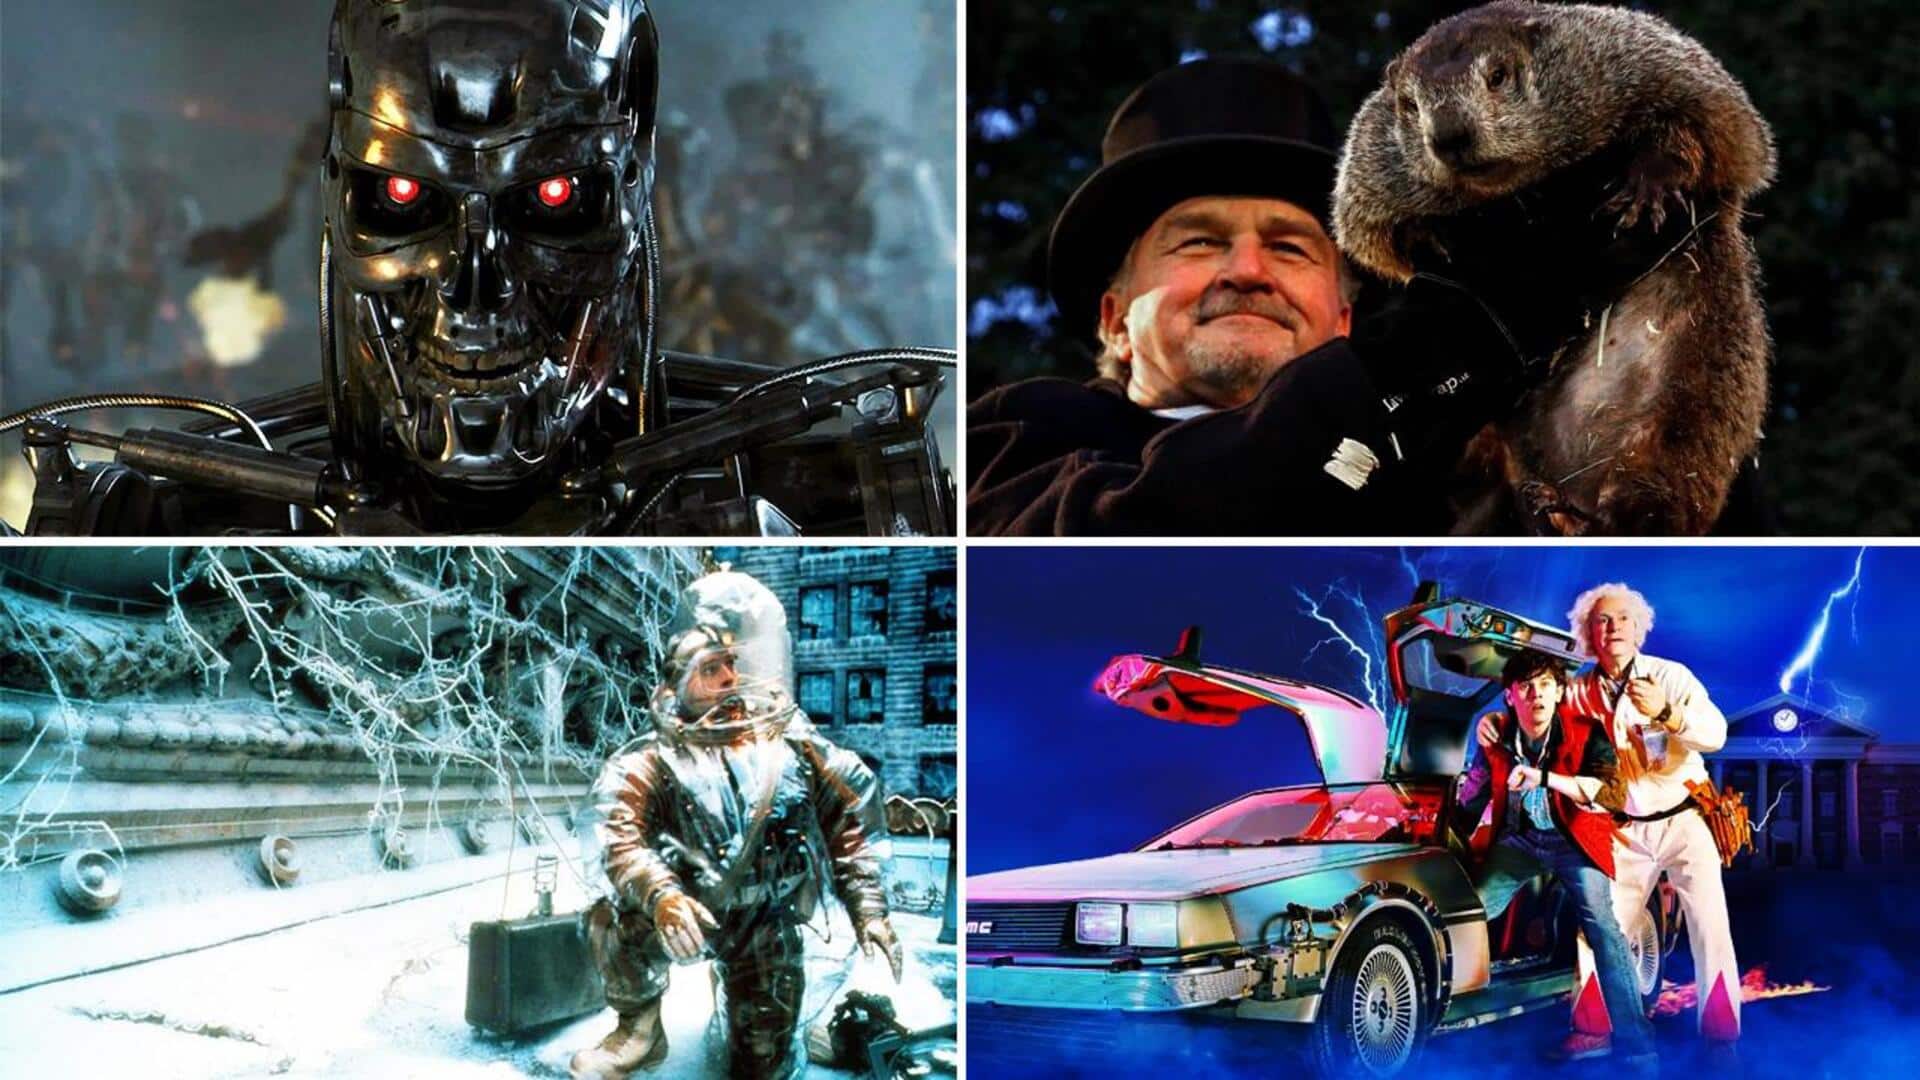 'Terminator 2' to 'Groundhog Day': Best IMDb-rated time-travel movies 